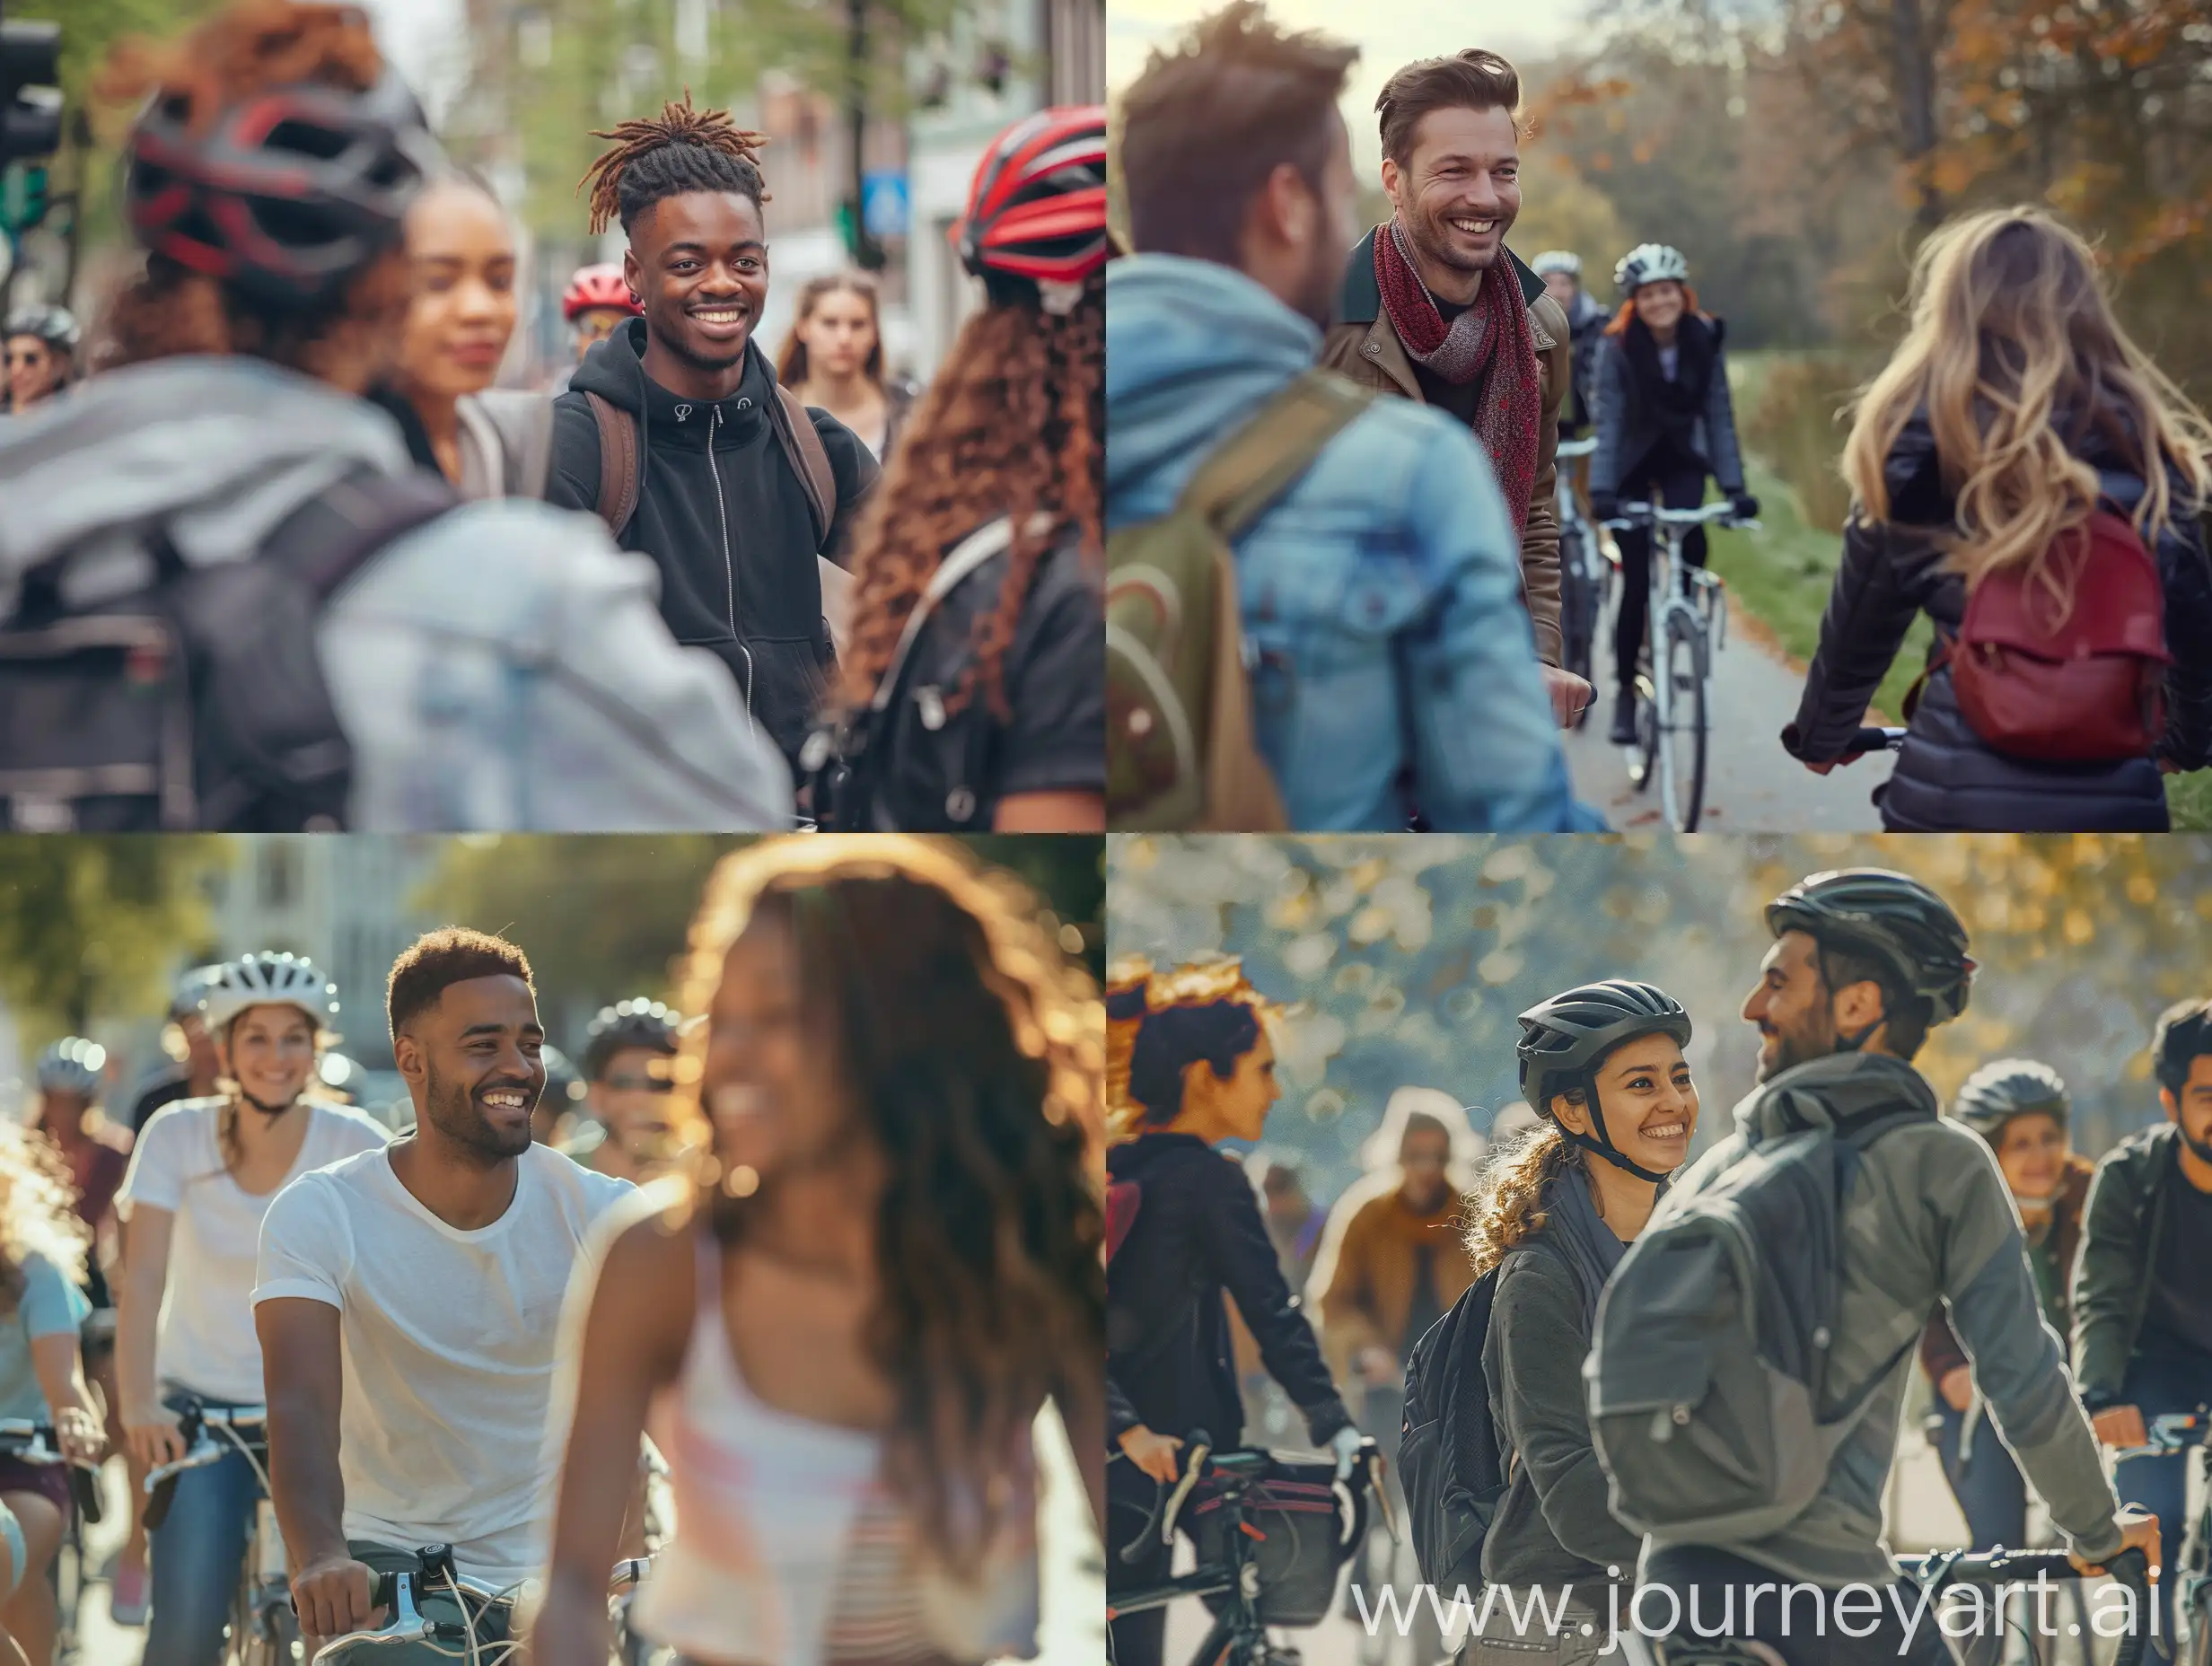 A group of cyclists pass by women, and a man smiles at her